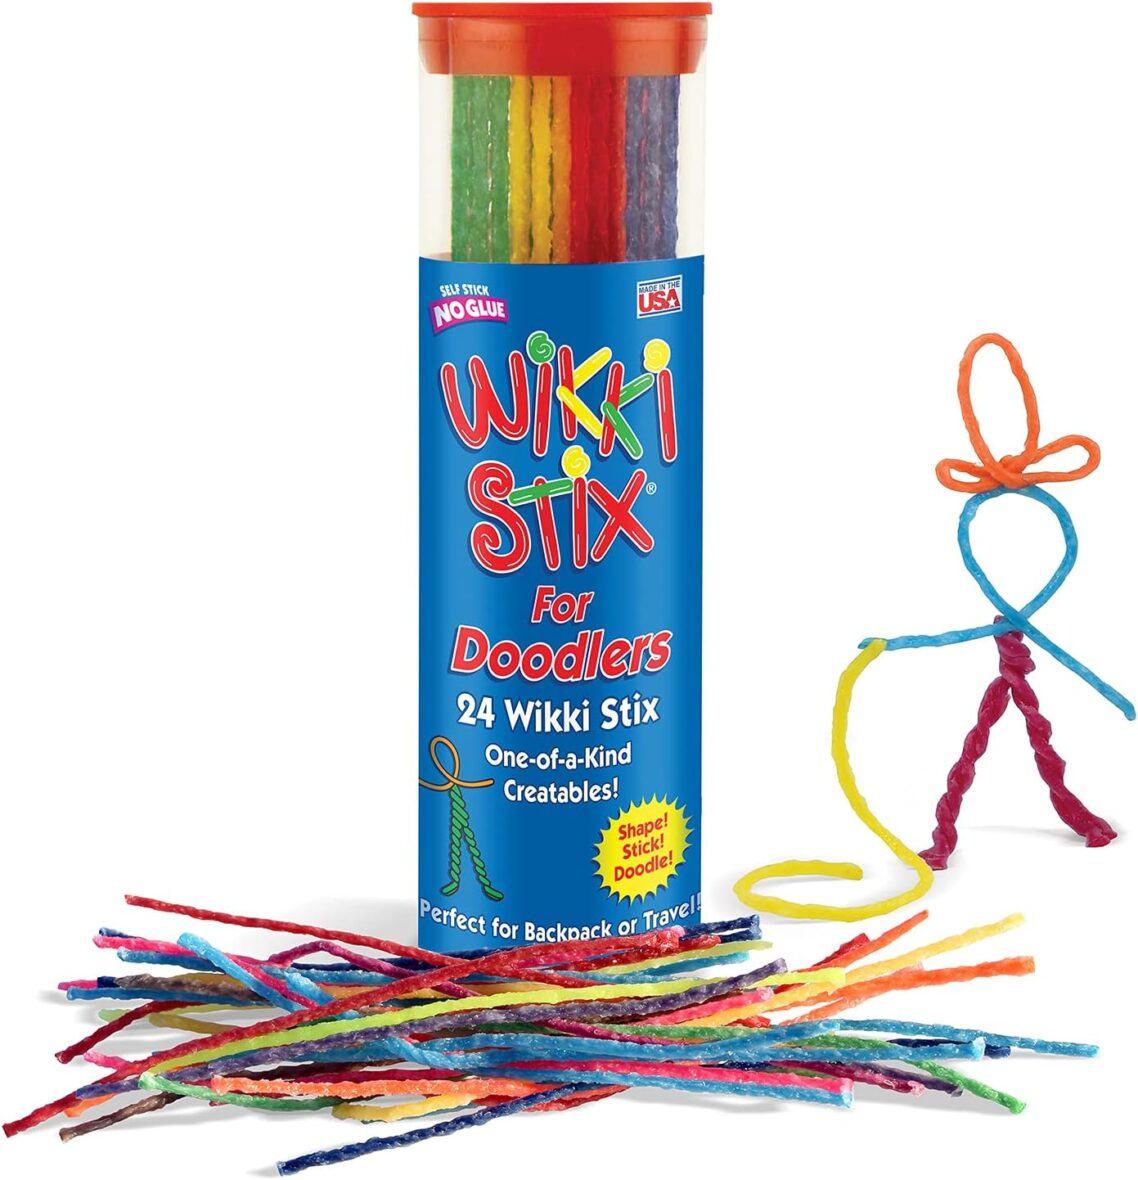 Wikki Stix Doodler, Fidget Toy Plus Arts & Crafts for Kids; Non-Toxic Waxed Yarn, Reusable Hands-on Fun! 6-inch Assorted Colors; 24-Pack.